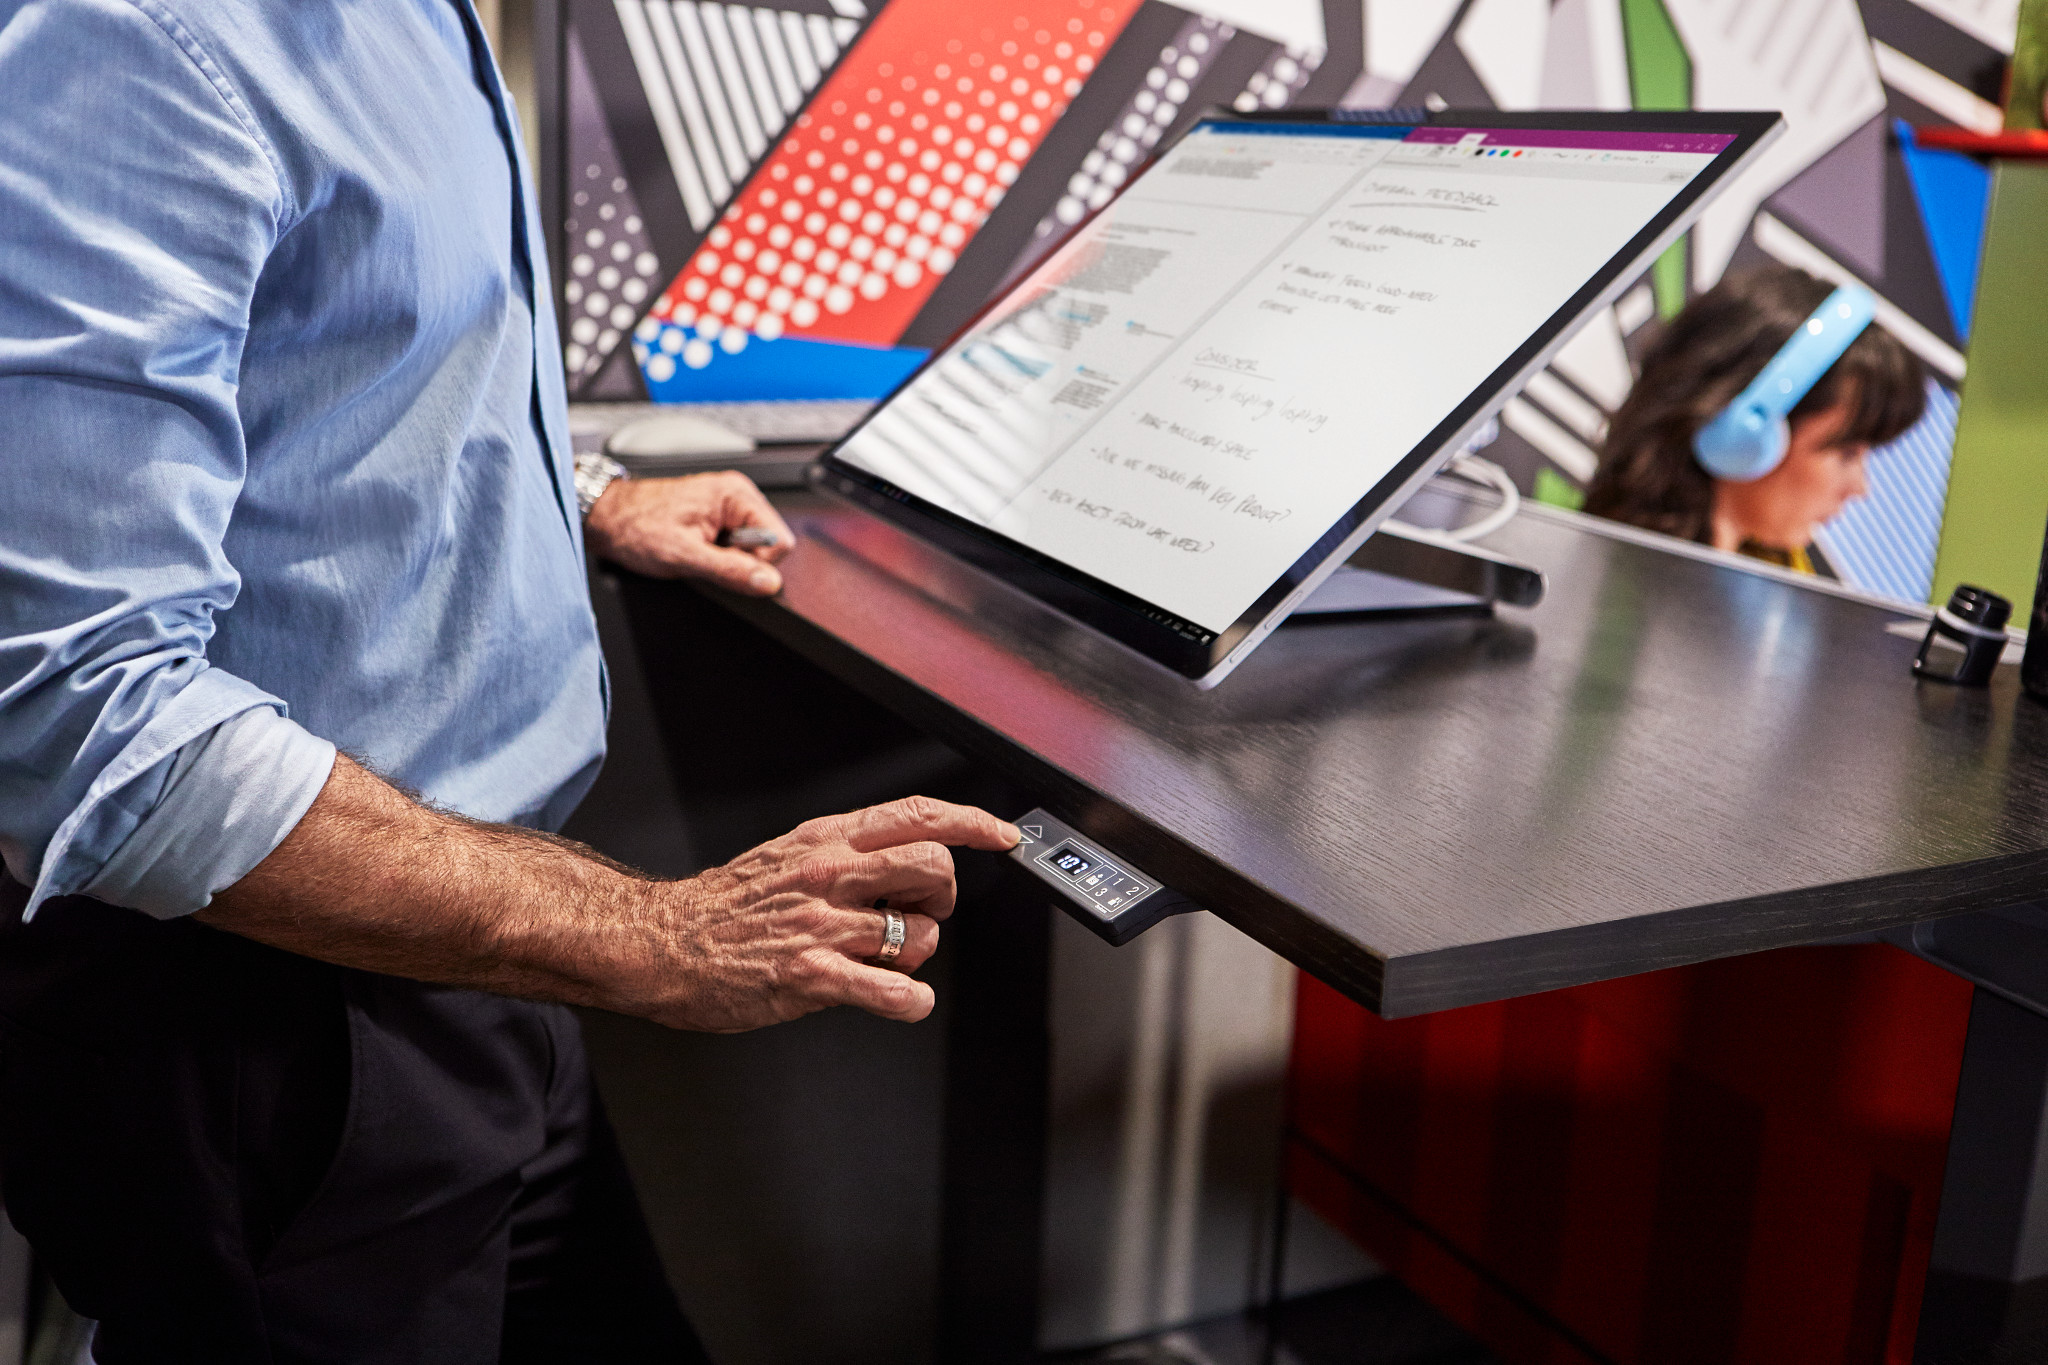 Surface and Steelcase want to make sure you can stay in your creative flow, whether you are standing or sitting.